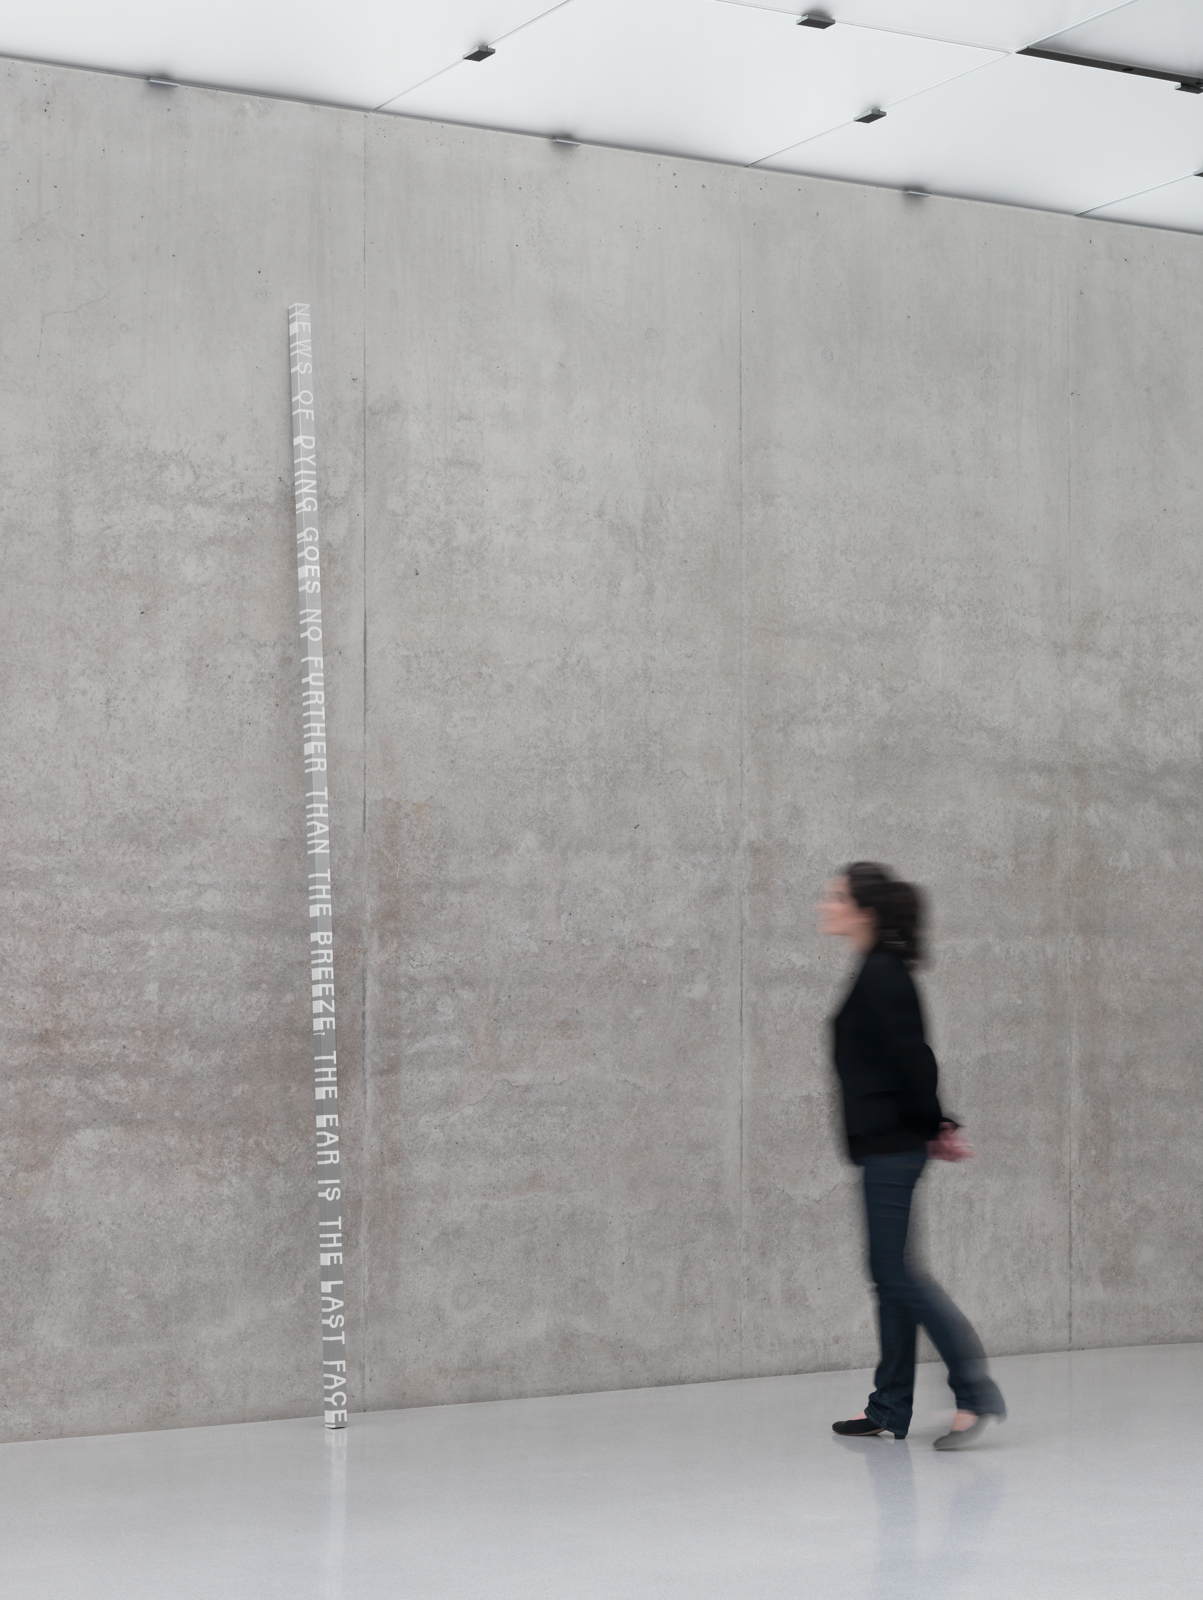 Roni Horn / "White Dickinson", installation view, "Well and Truly", Kunsthaus Bregenz, 2010  / 2010